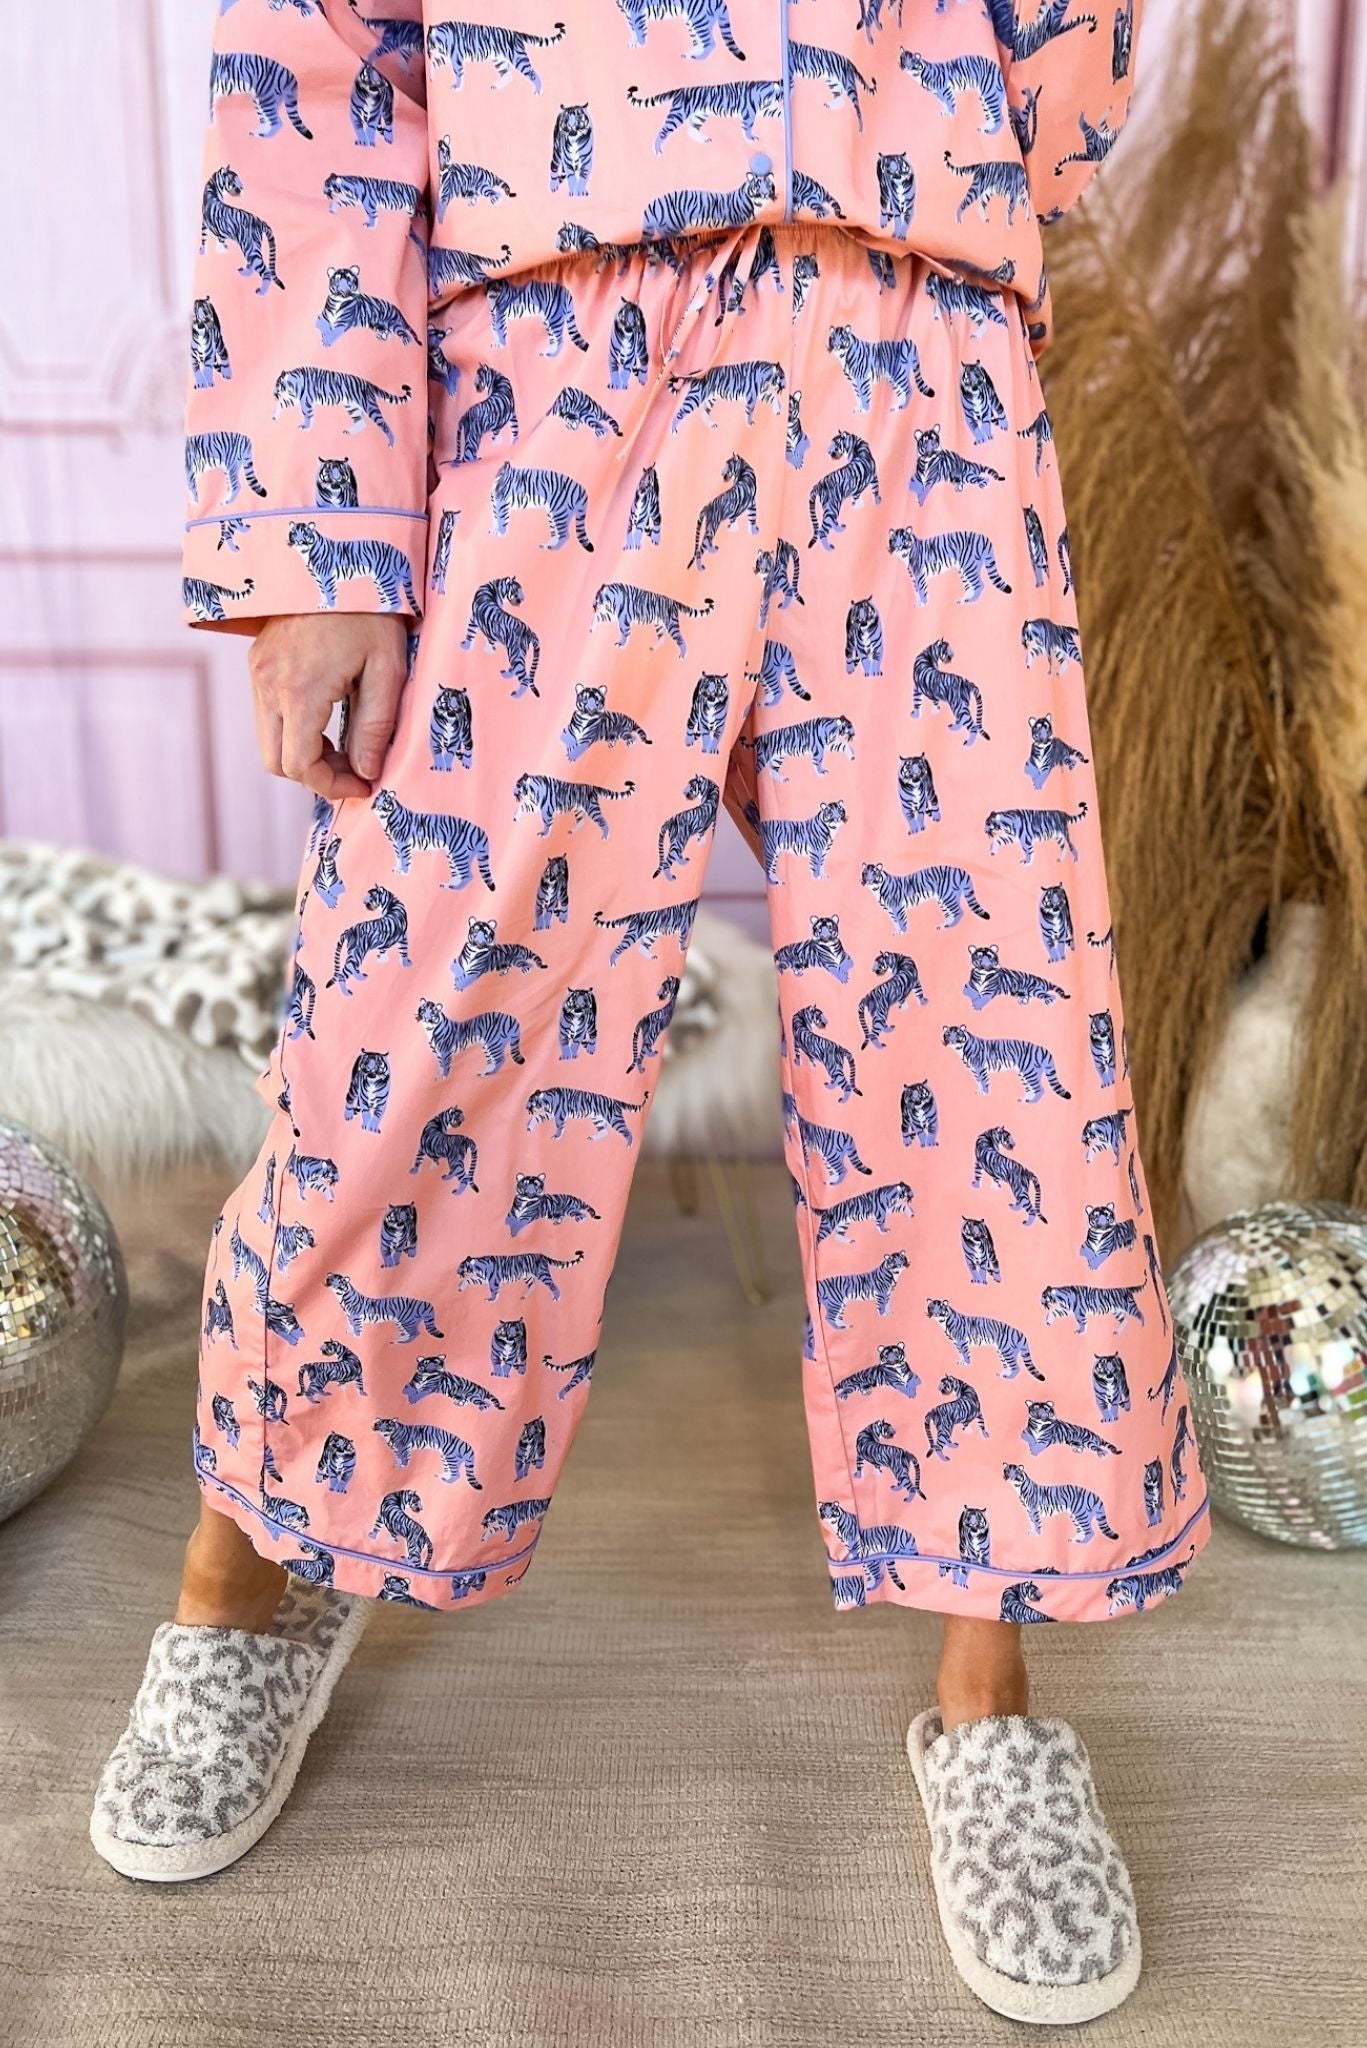 Lavender Tiger Long Sleeve Pajama Pant Set SSYS The Label, cozy collection, everyday wear, lounge wear, mom style, must have, shop style your senses by mallory fitzsimmons